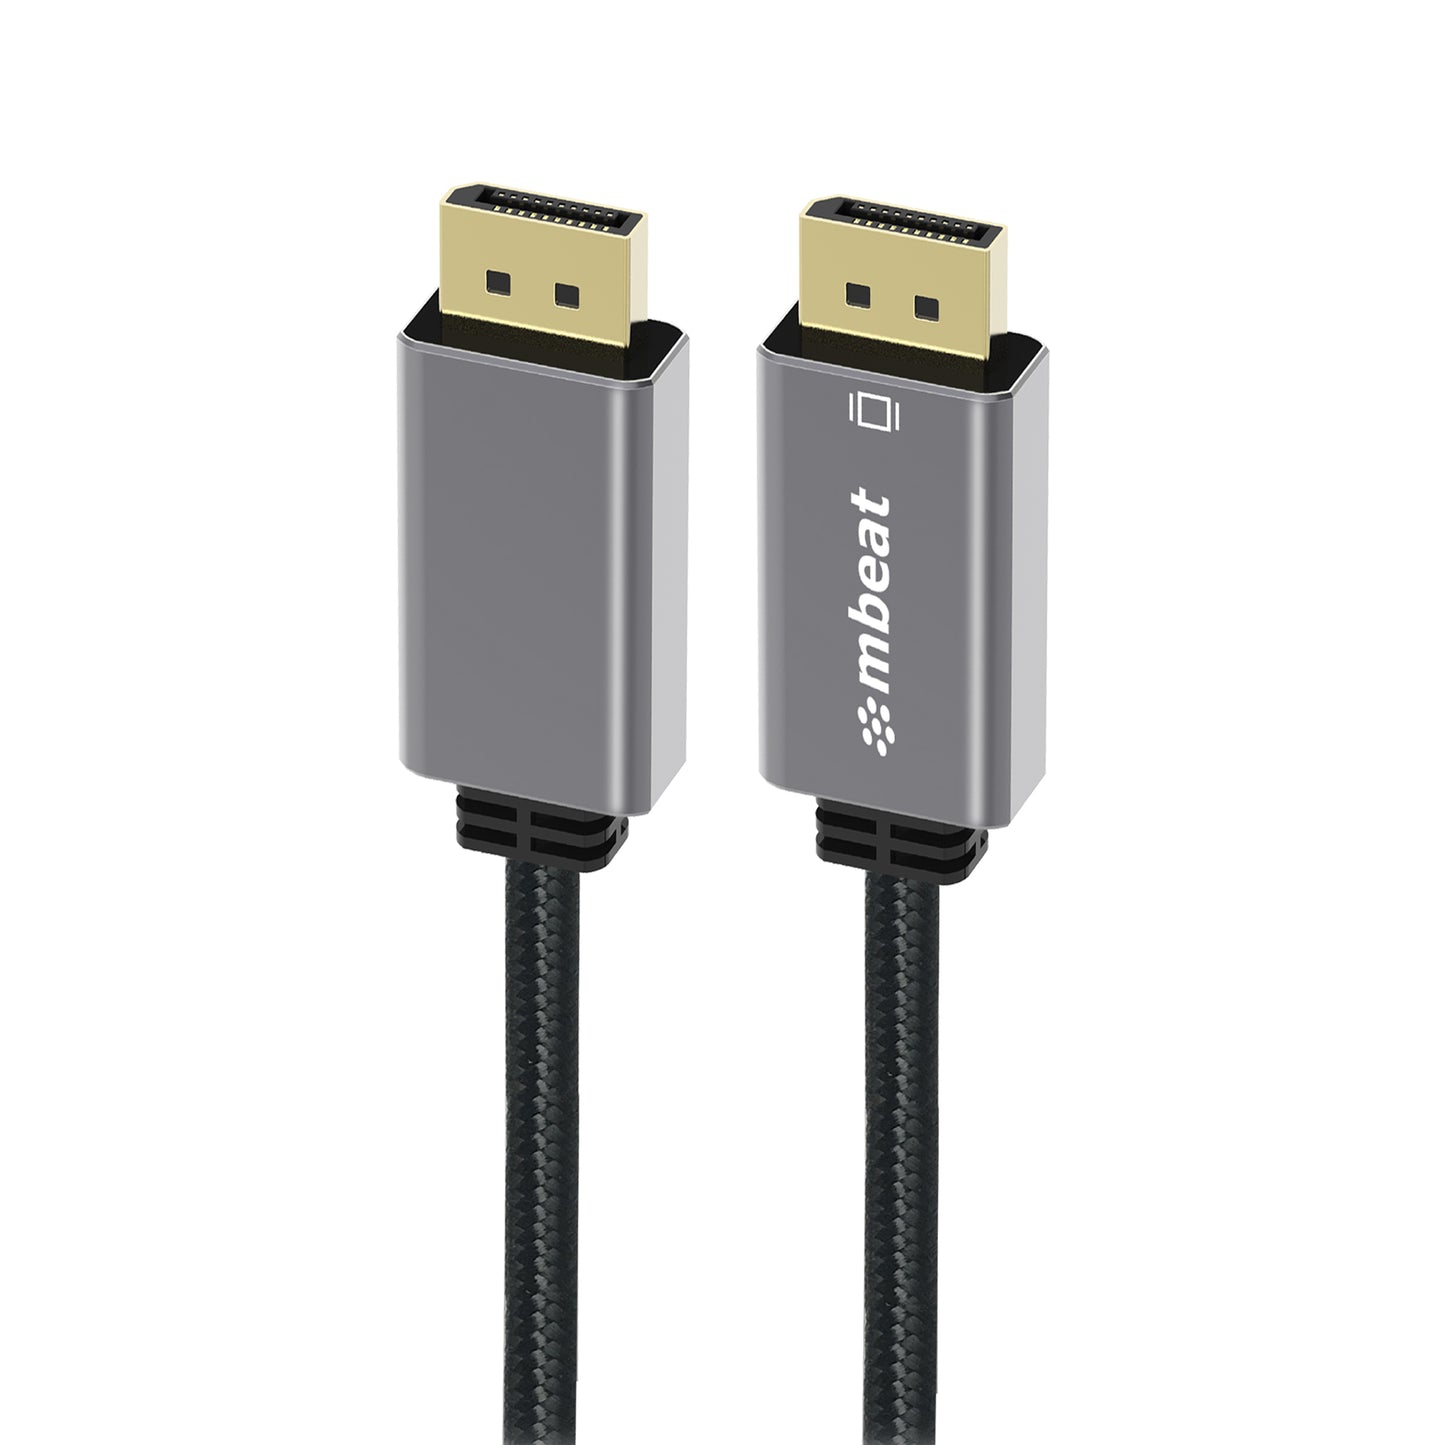 mbeat Tough Link 1.8m Display Port Cable v1.4 - Connects Computer, Laptop to HDTV, Monitor, Gaming Console, Supports 8K@60Hz (7680x4320) - Space Grey MB-XCB-DP18